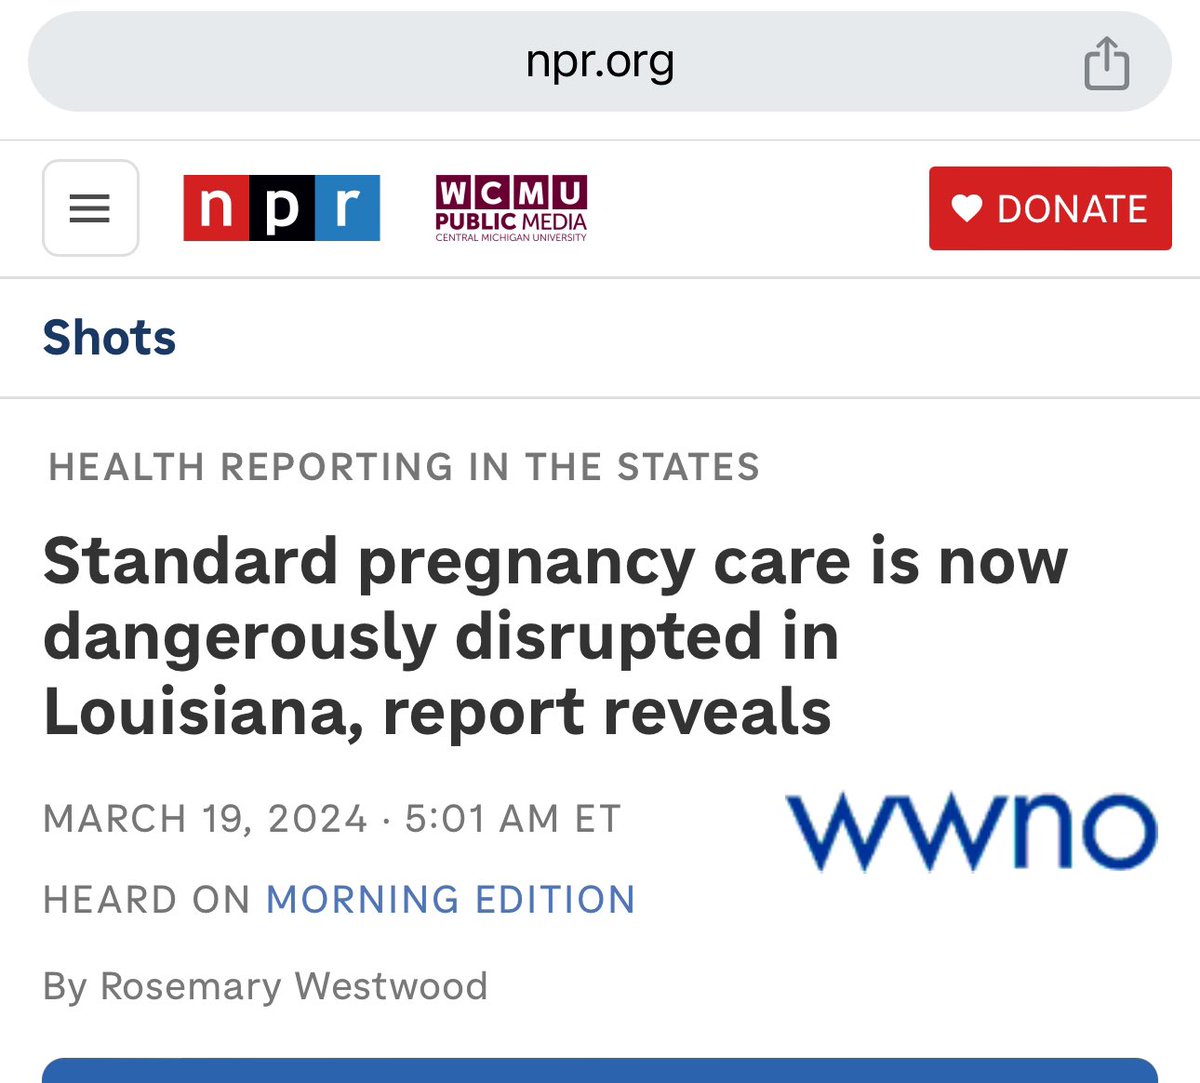 The evidence of the brutality of abortion bans continue to unfold. These draconian laws are designed to make doctors the scapegoats for ignorant pro-death fascists. As was predicted, for years, the chilling effect is now in full swing & the maternal healthcare in red states